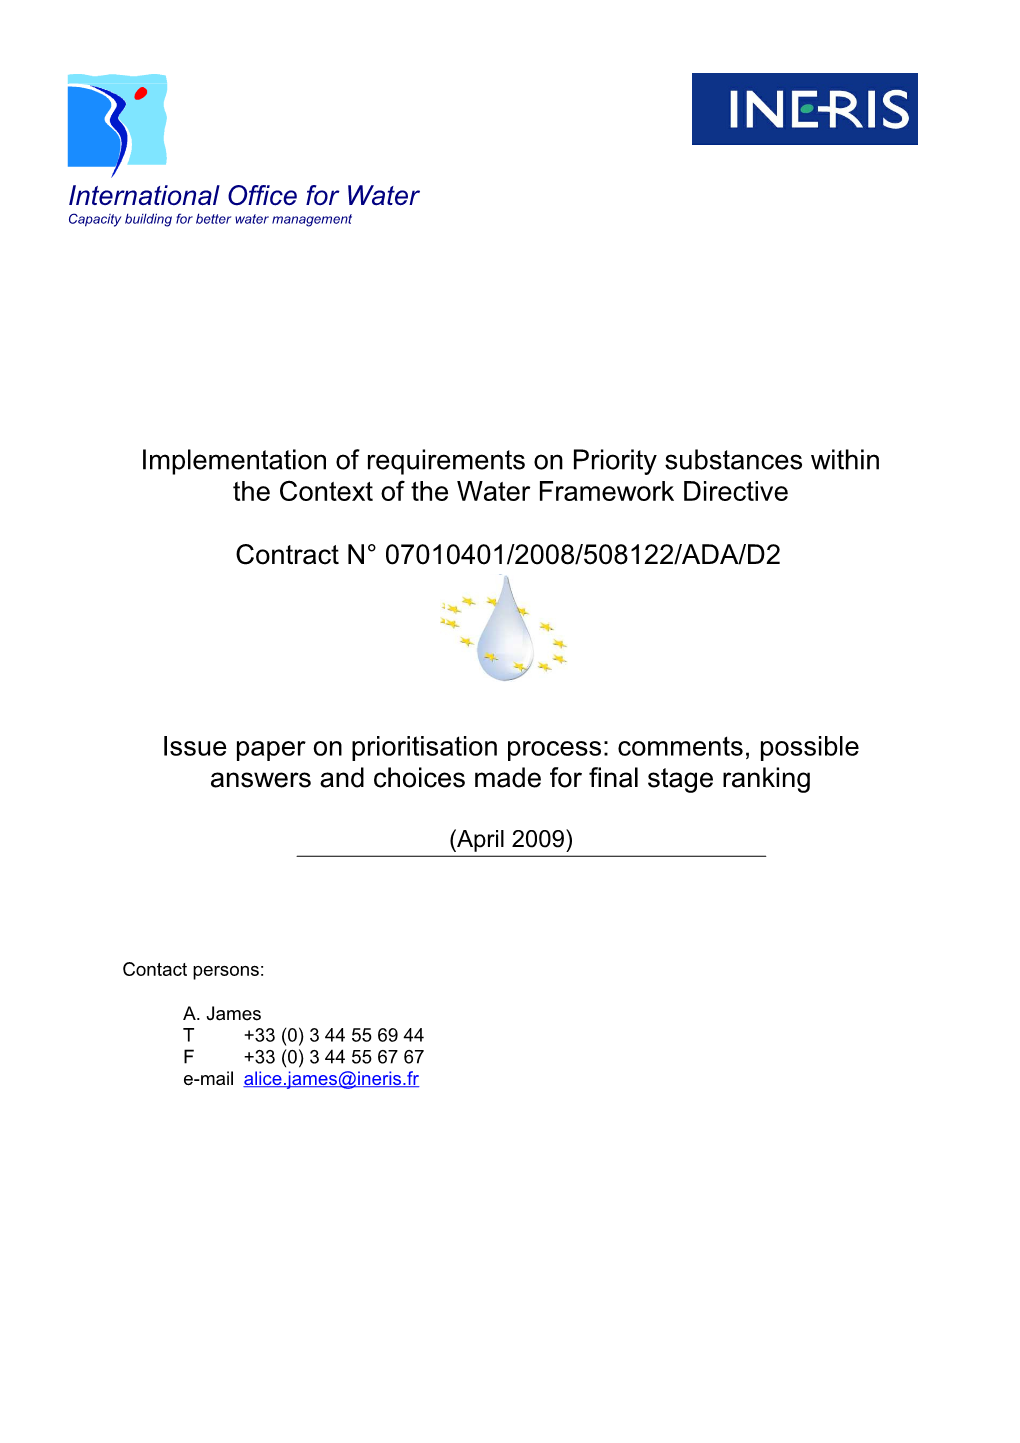 Implementation of Requirements on Priority Substances Within the Context of the Water Framework